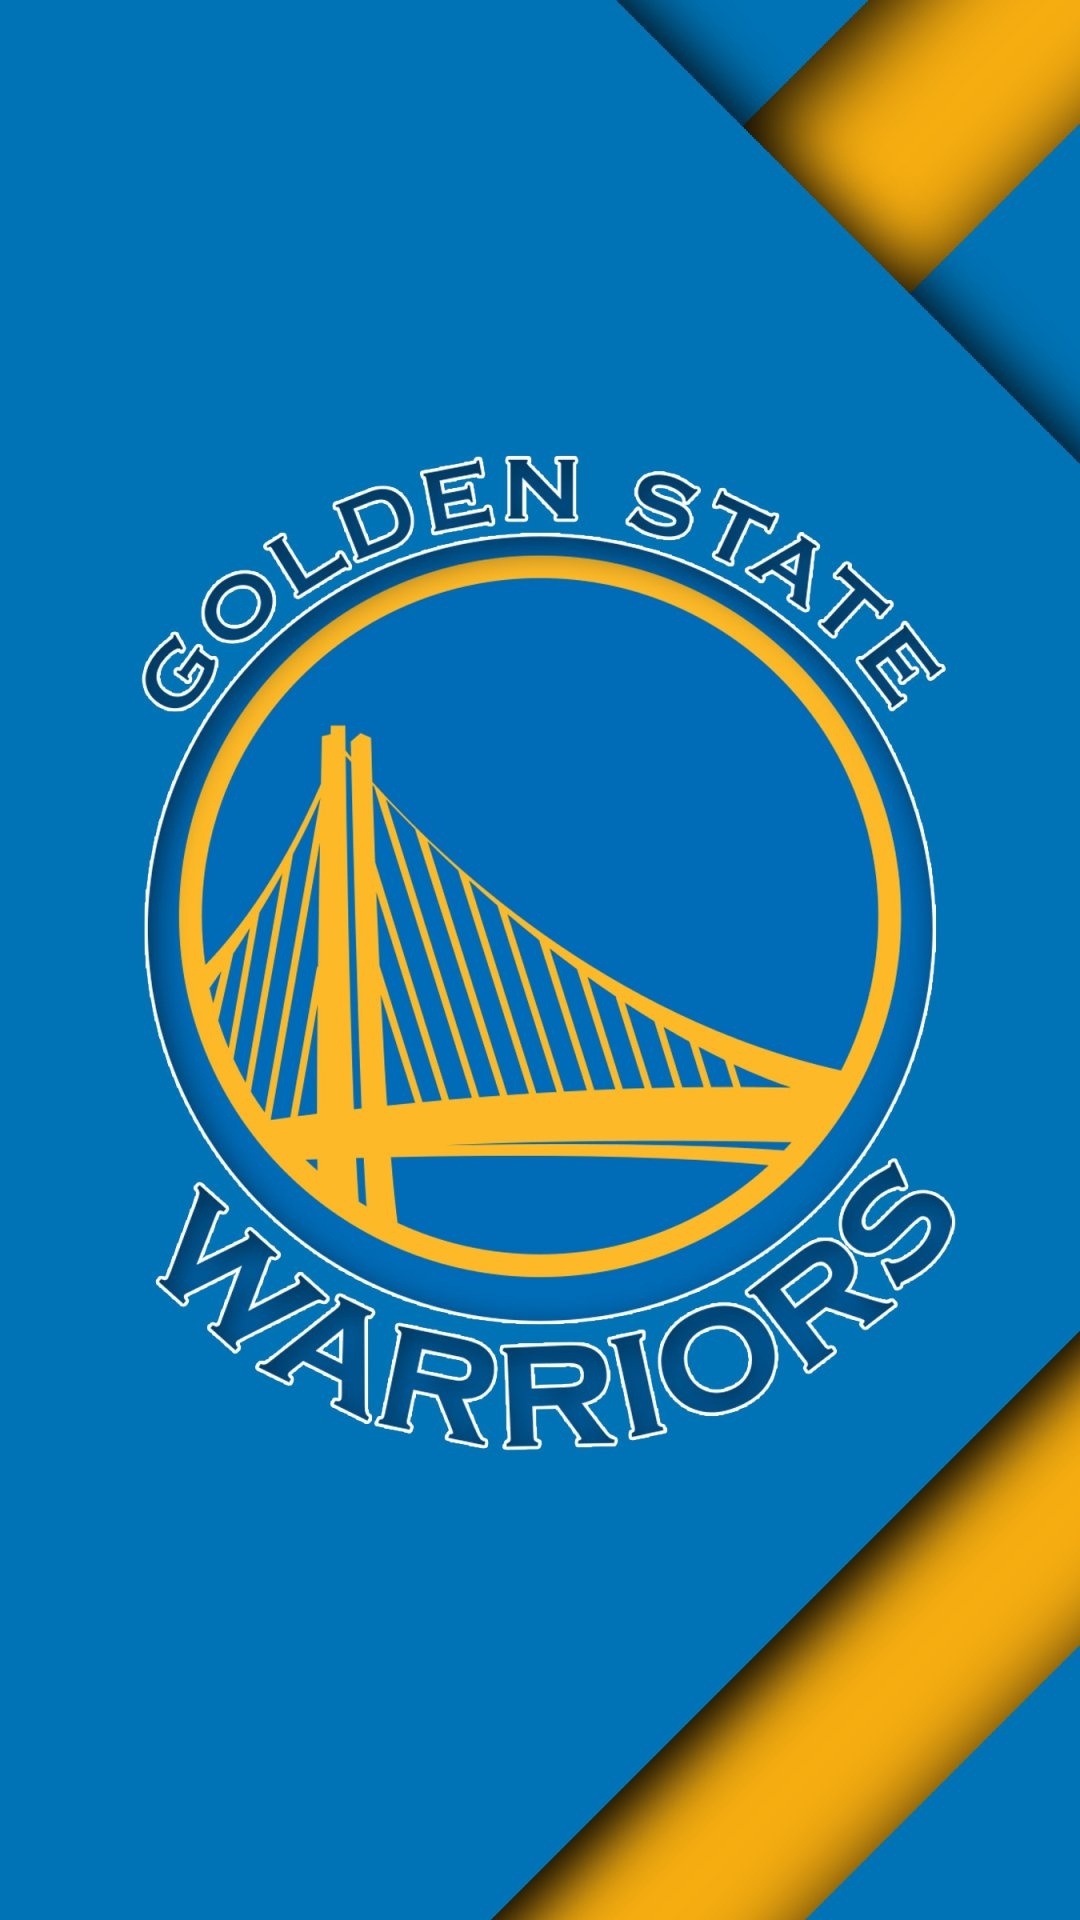 Golden State Warriors: The team lost the 1964 NBA Finals to the Boston Celtics. 1080x1920 Full HD Wallpaper.